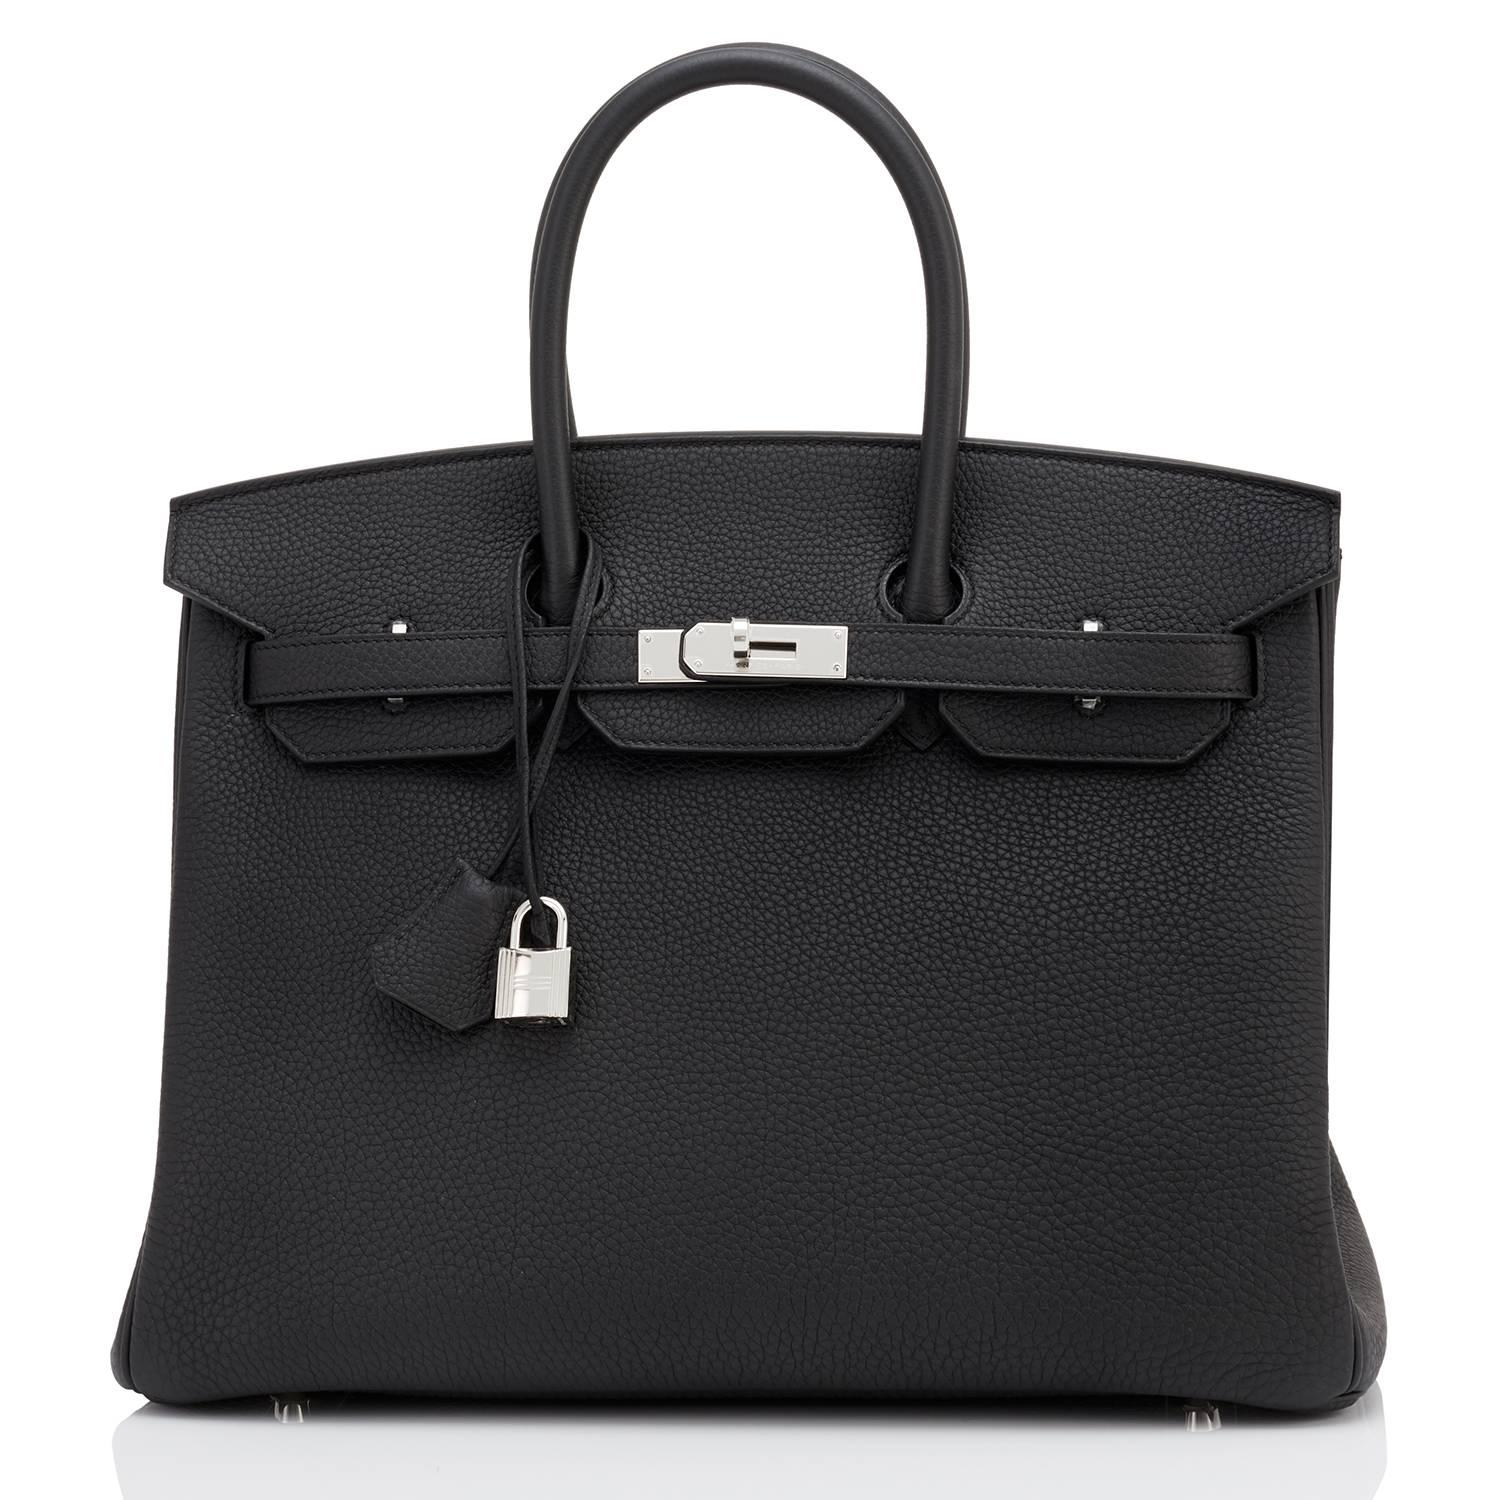 Hermes Black Togo 35cm Birkin Palladium Hardware Bag A Stamp
Brand New in Box.  Store Fresh.  Pristine Condition (with plastic on hardware)
Just purchased from store; bag bears new 2017 interior A stamp! 
Perfect gift! Comes with lock, keys,